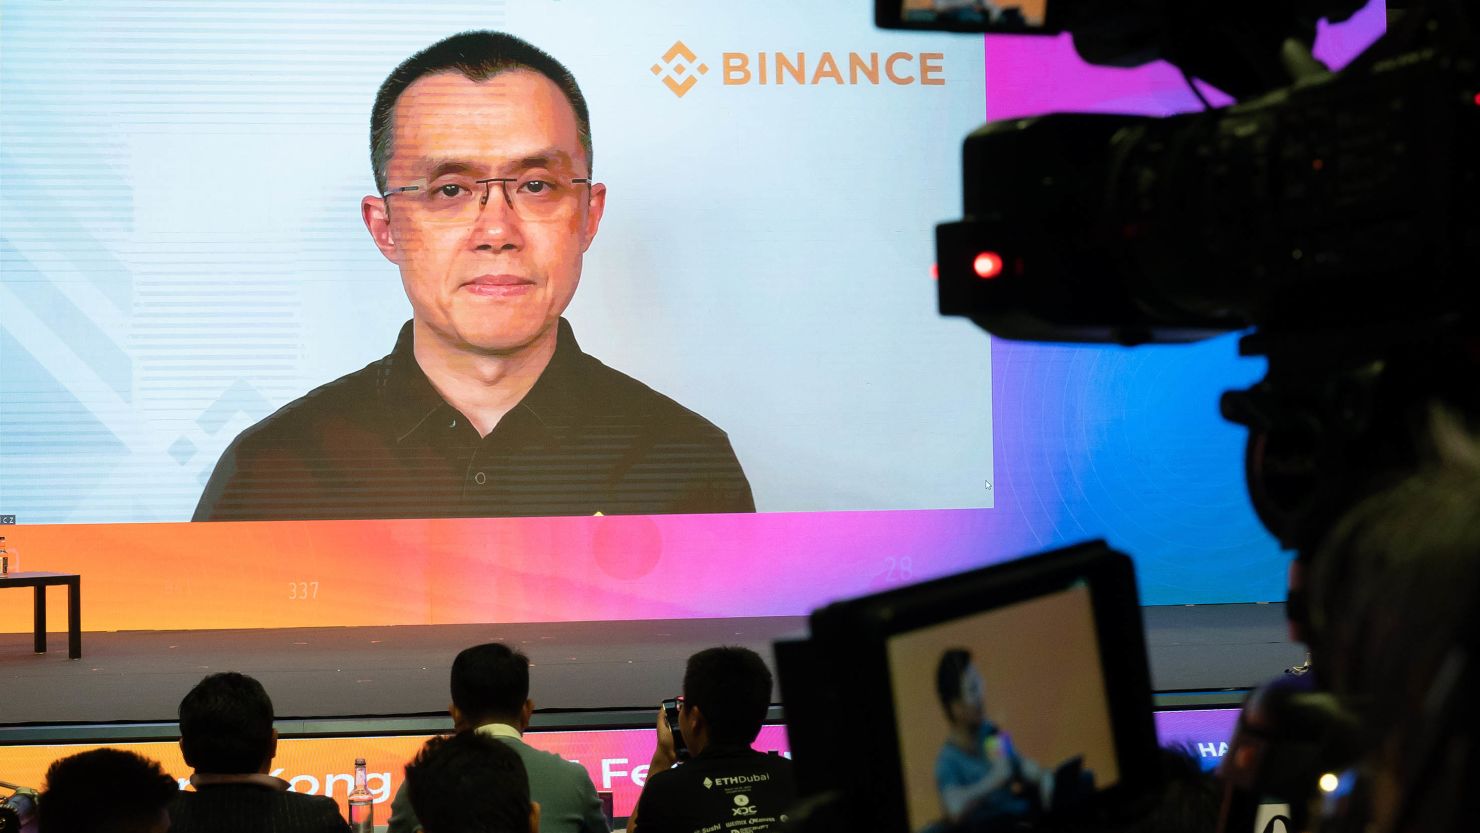 Binance CEO Changpeng Zhao and his company were sued by the US Securities and Exchange Commission Monday.